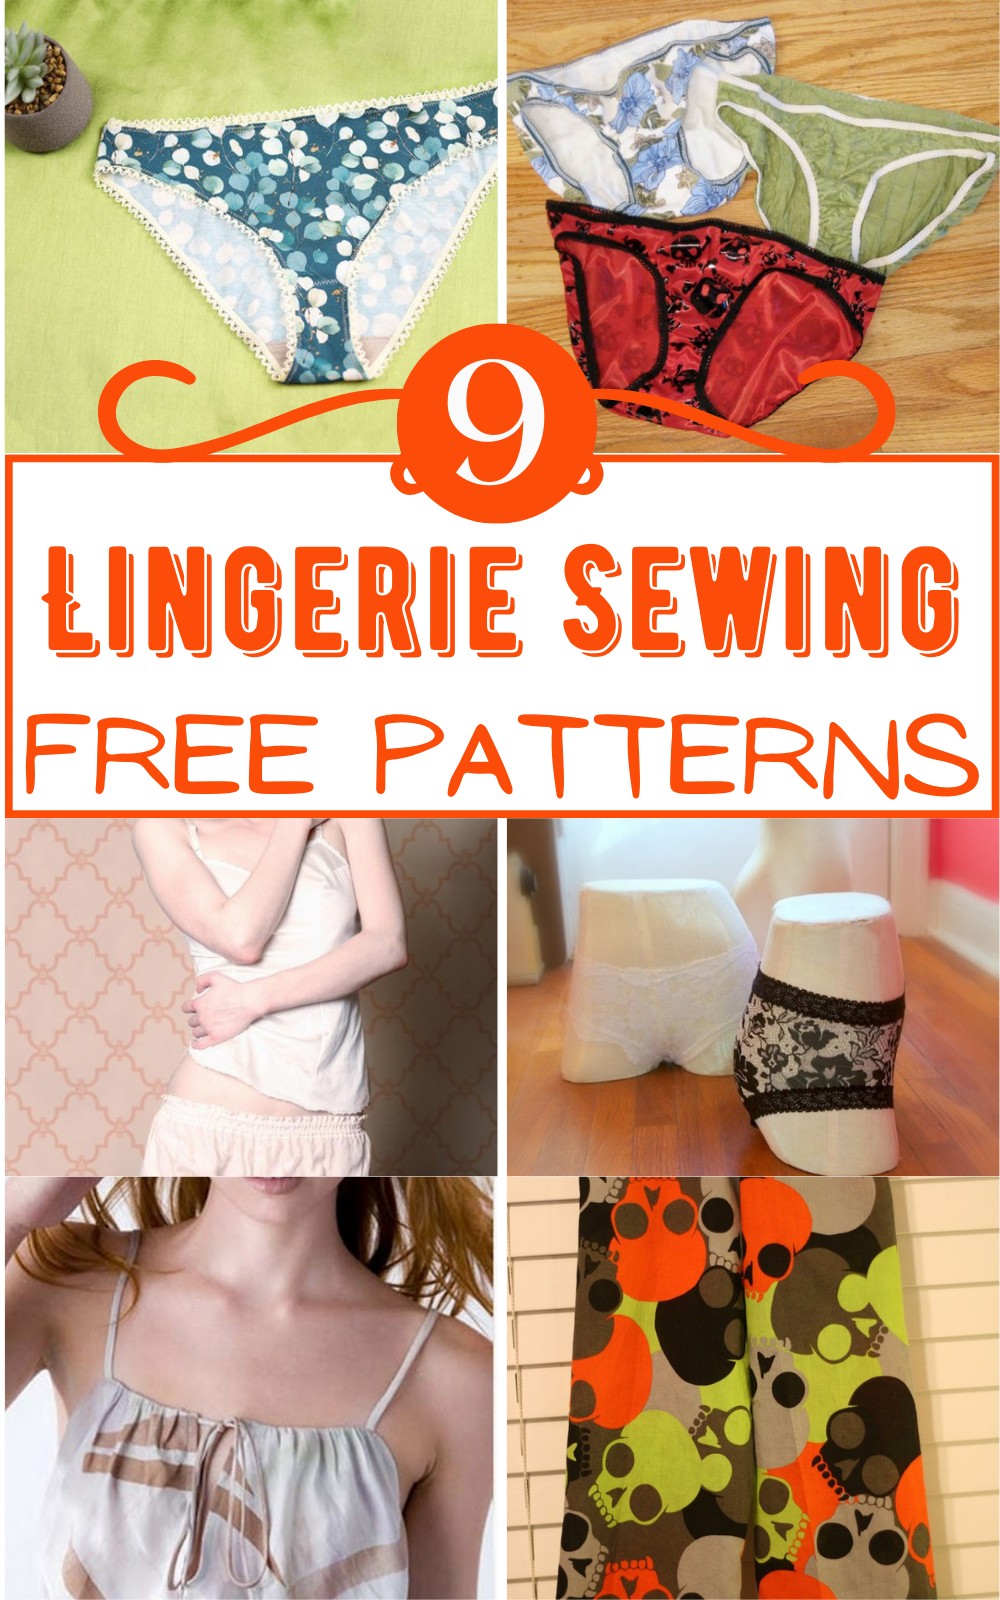 Free Lingerie Sewing Patterns 2